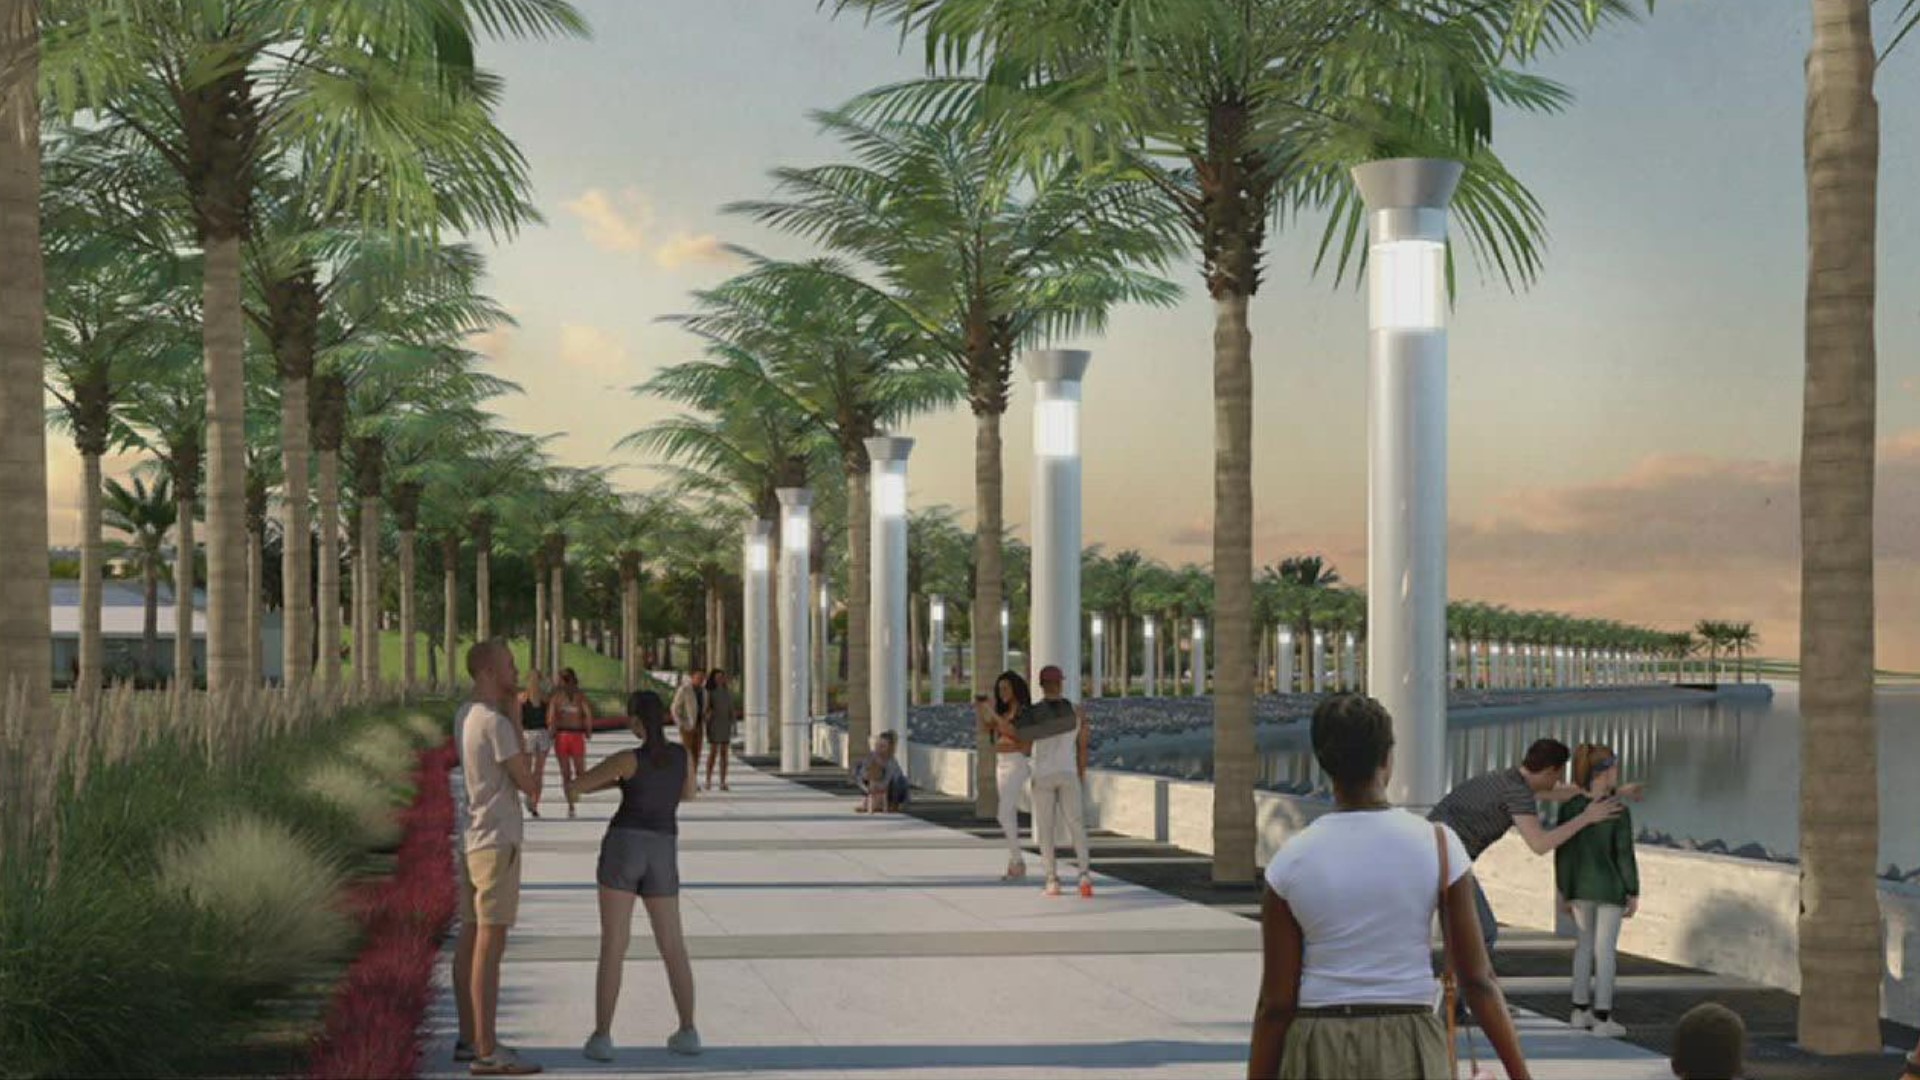 The pier was just the beginning of the vision in place for Cole Park.